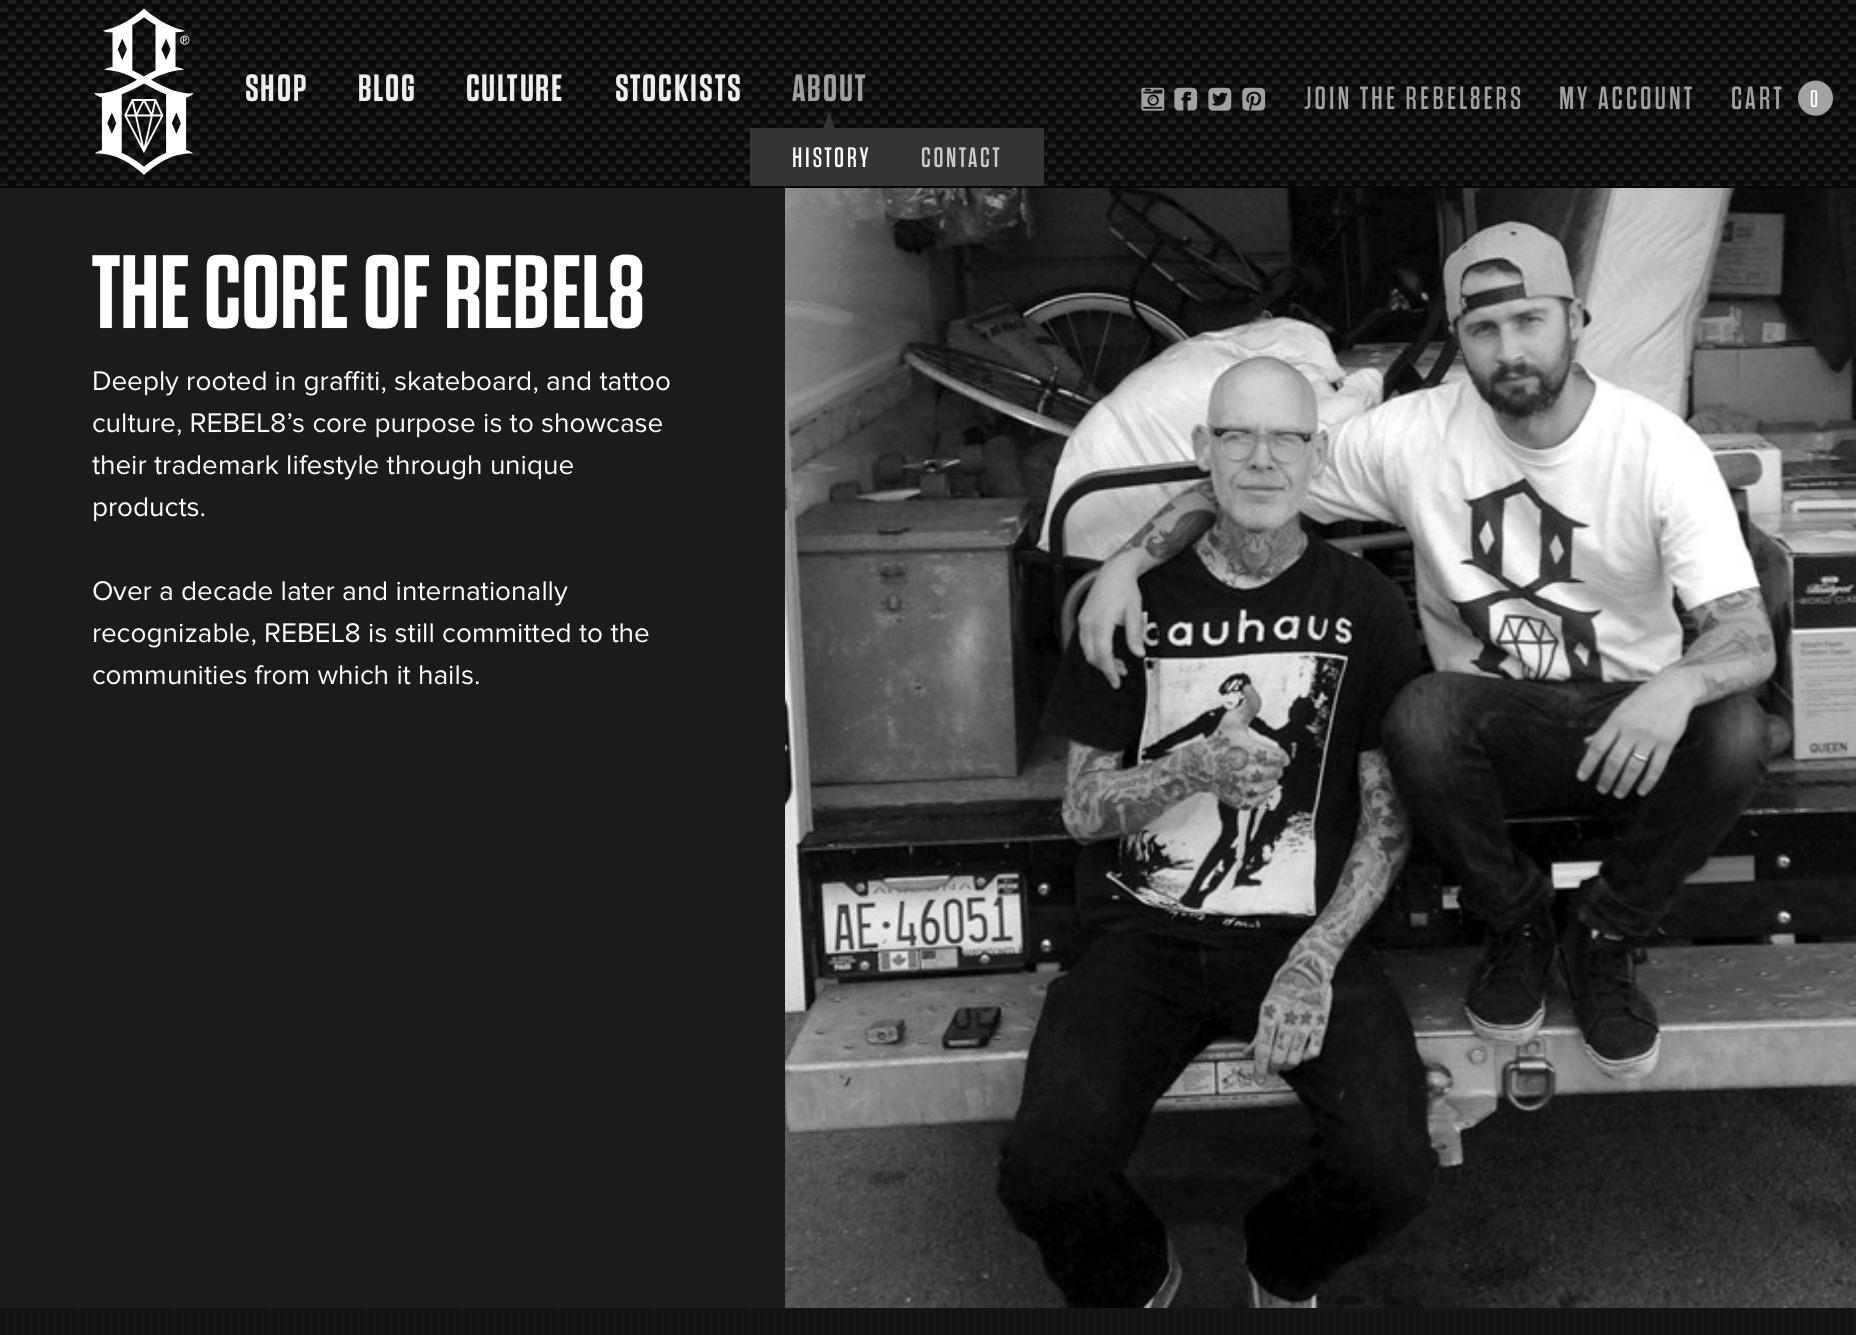 Cover image of this place Rebel 8 clothing 